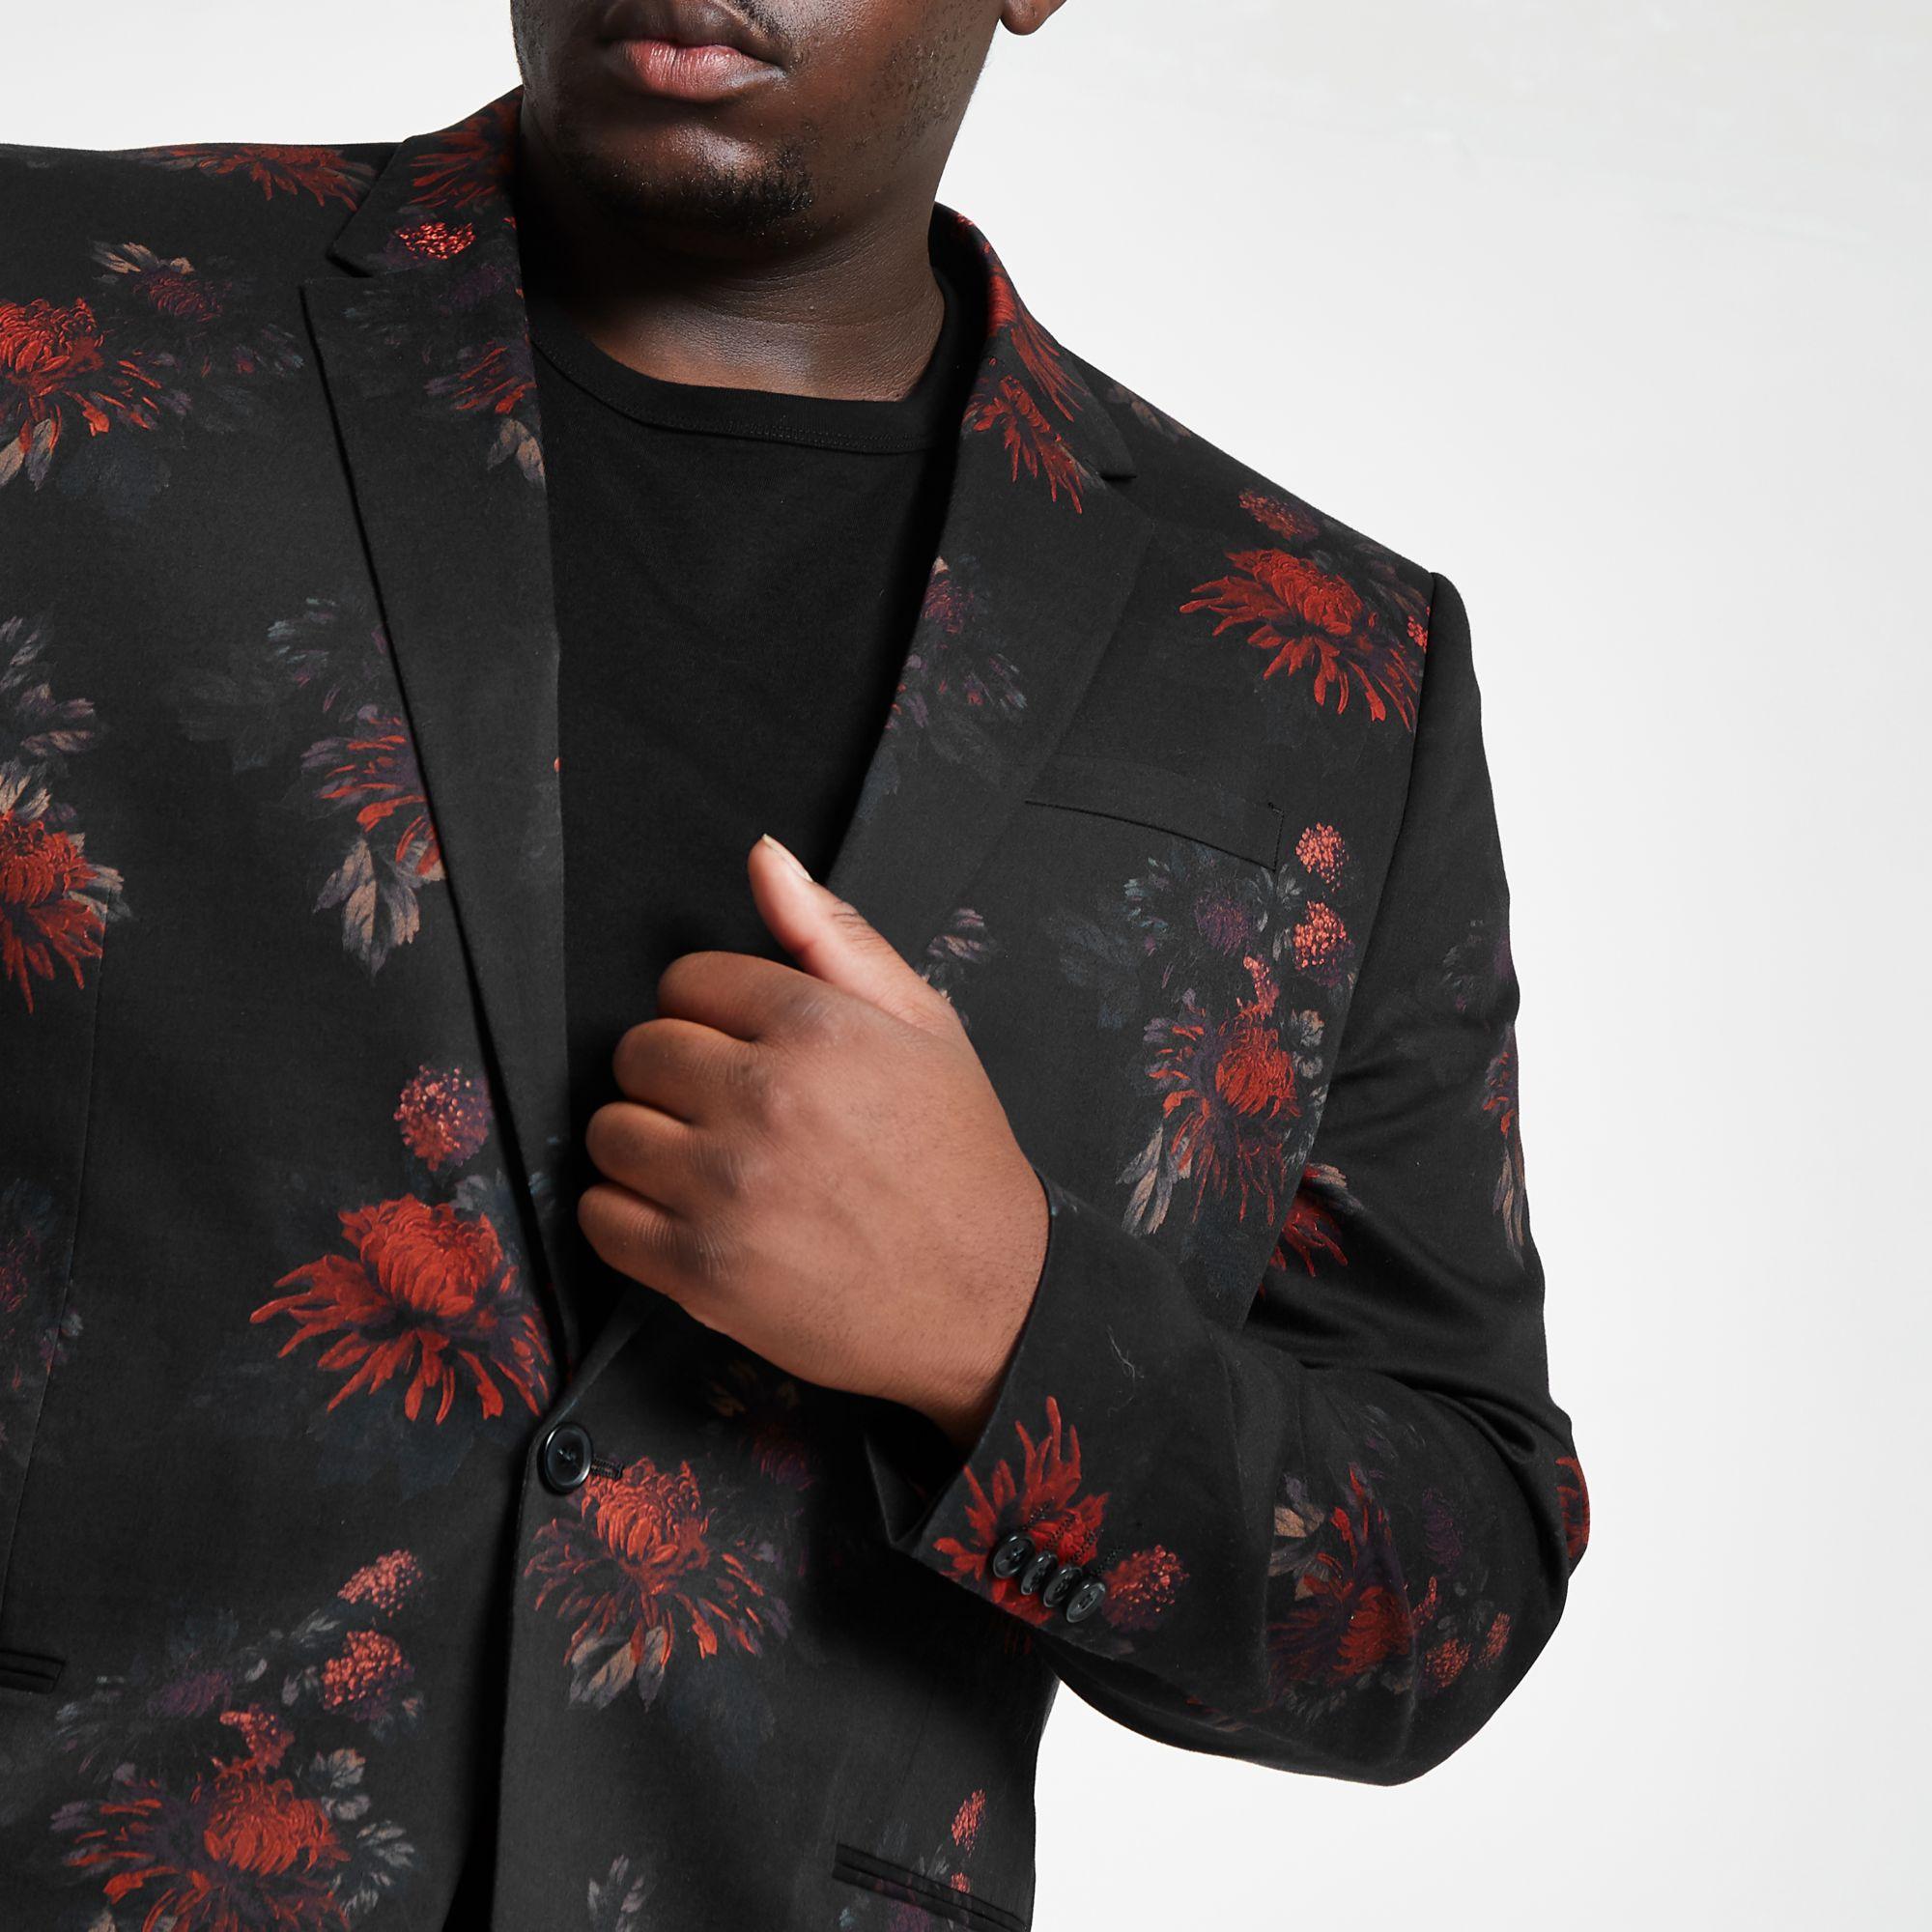 River Island Big And Tall Black Floral Suit Jacket for Men